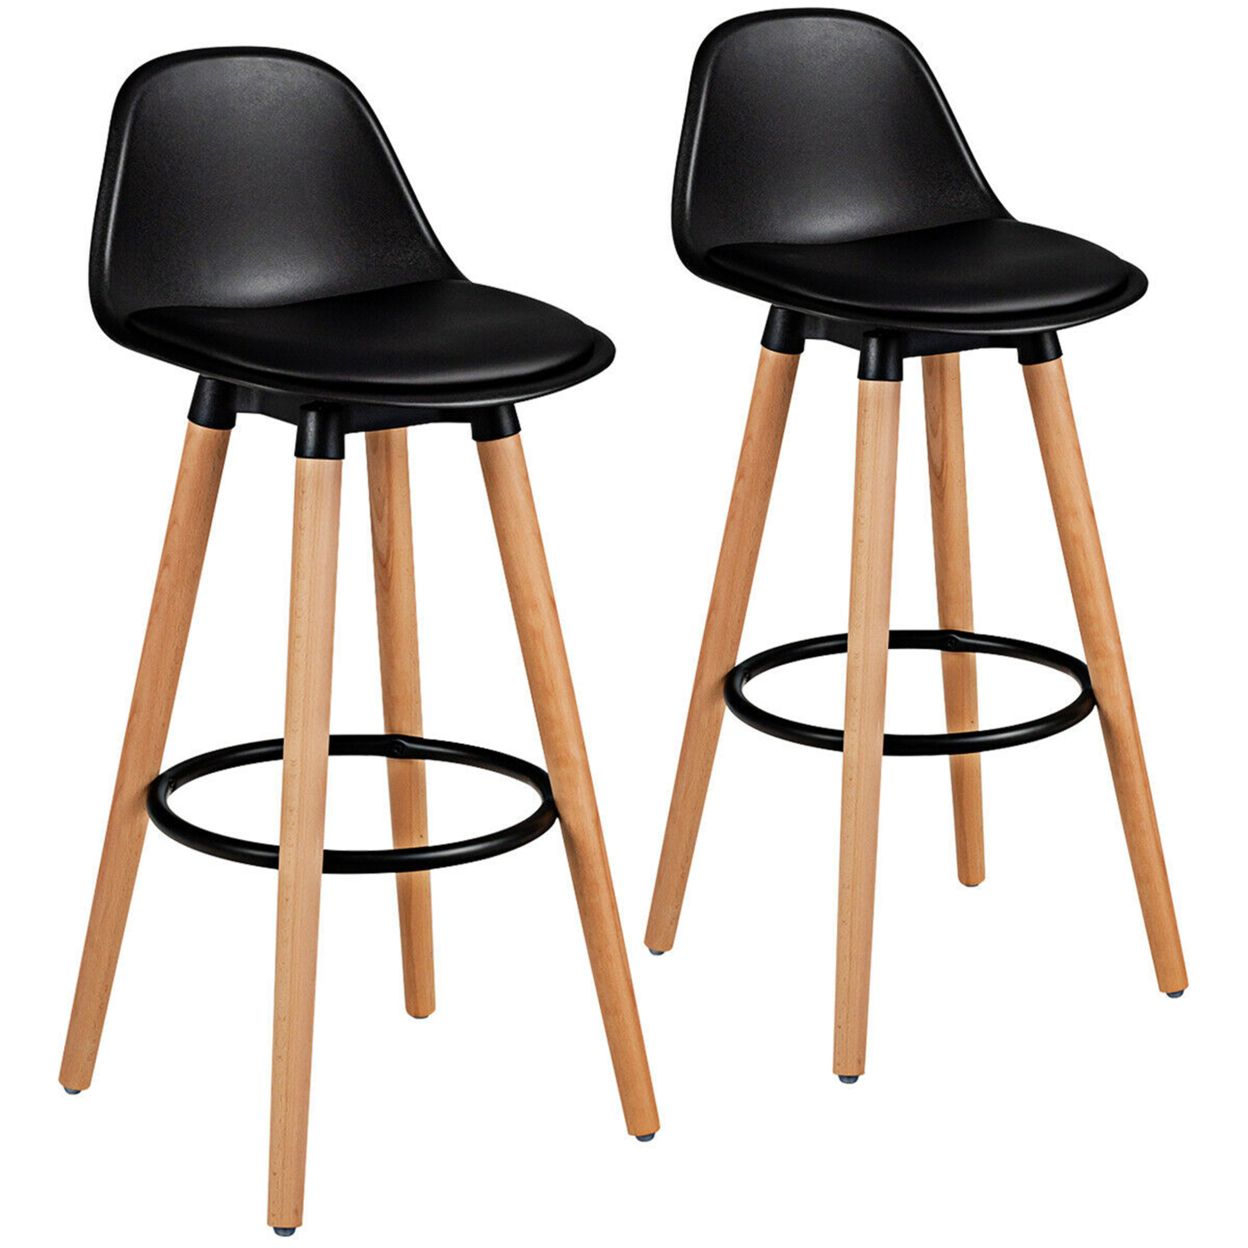 Set Of 2 Mid Century Barstool 28.5 Dining Pub Chair W/Leather Padded Seat Black